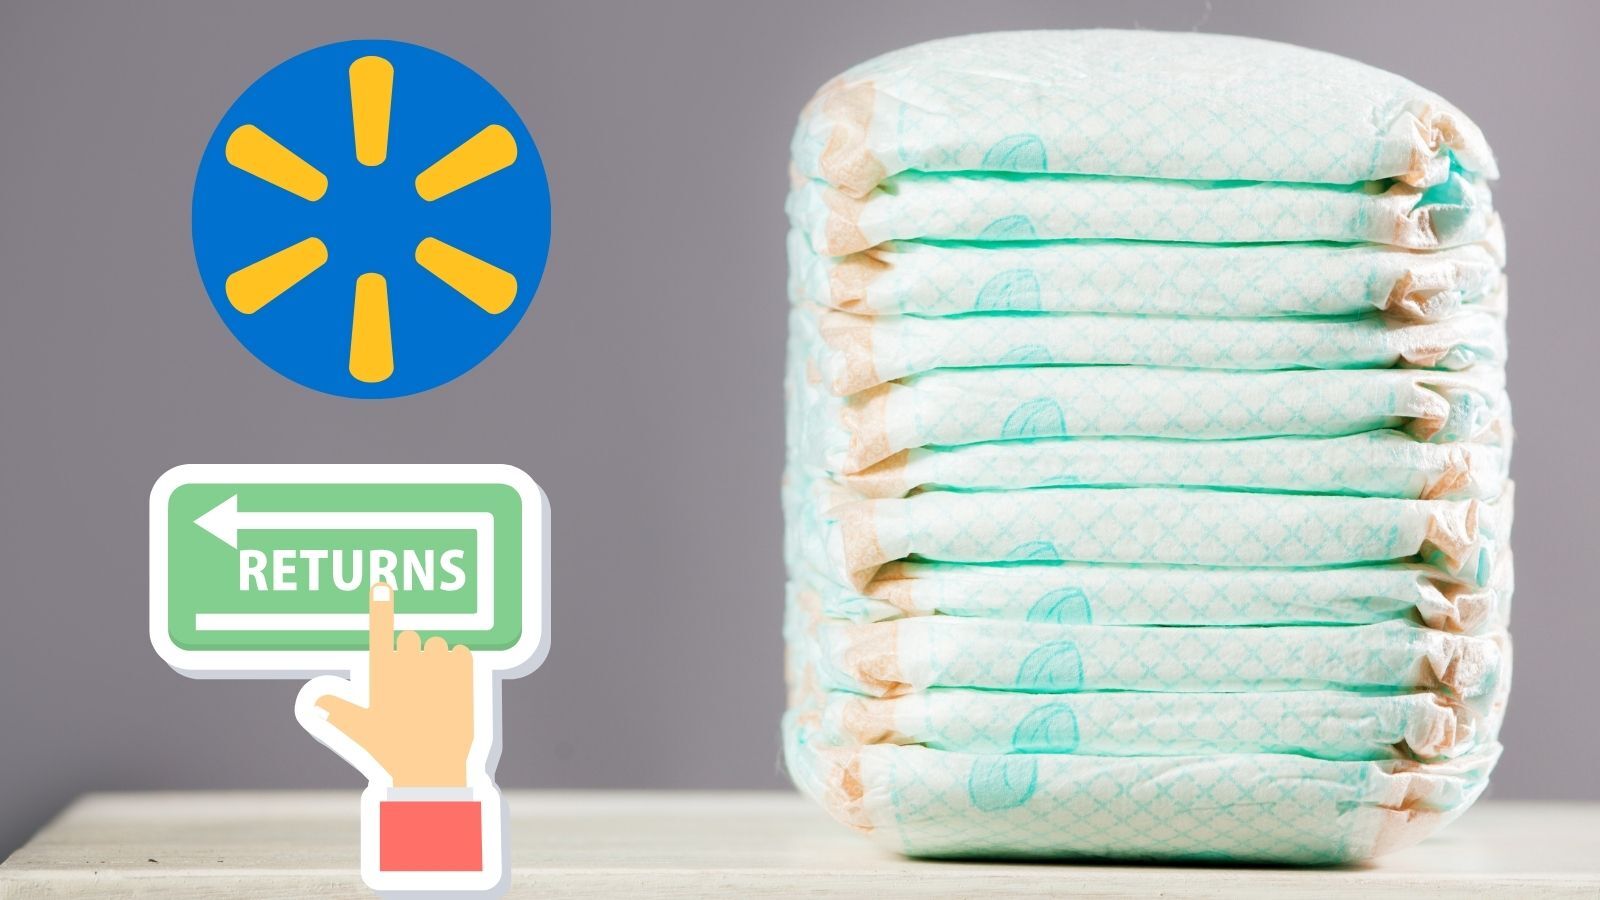 Walmart Diaper Return Policy: What Should You Know?